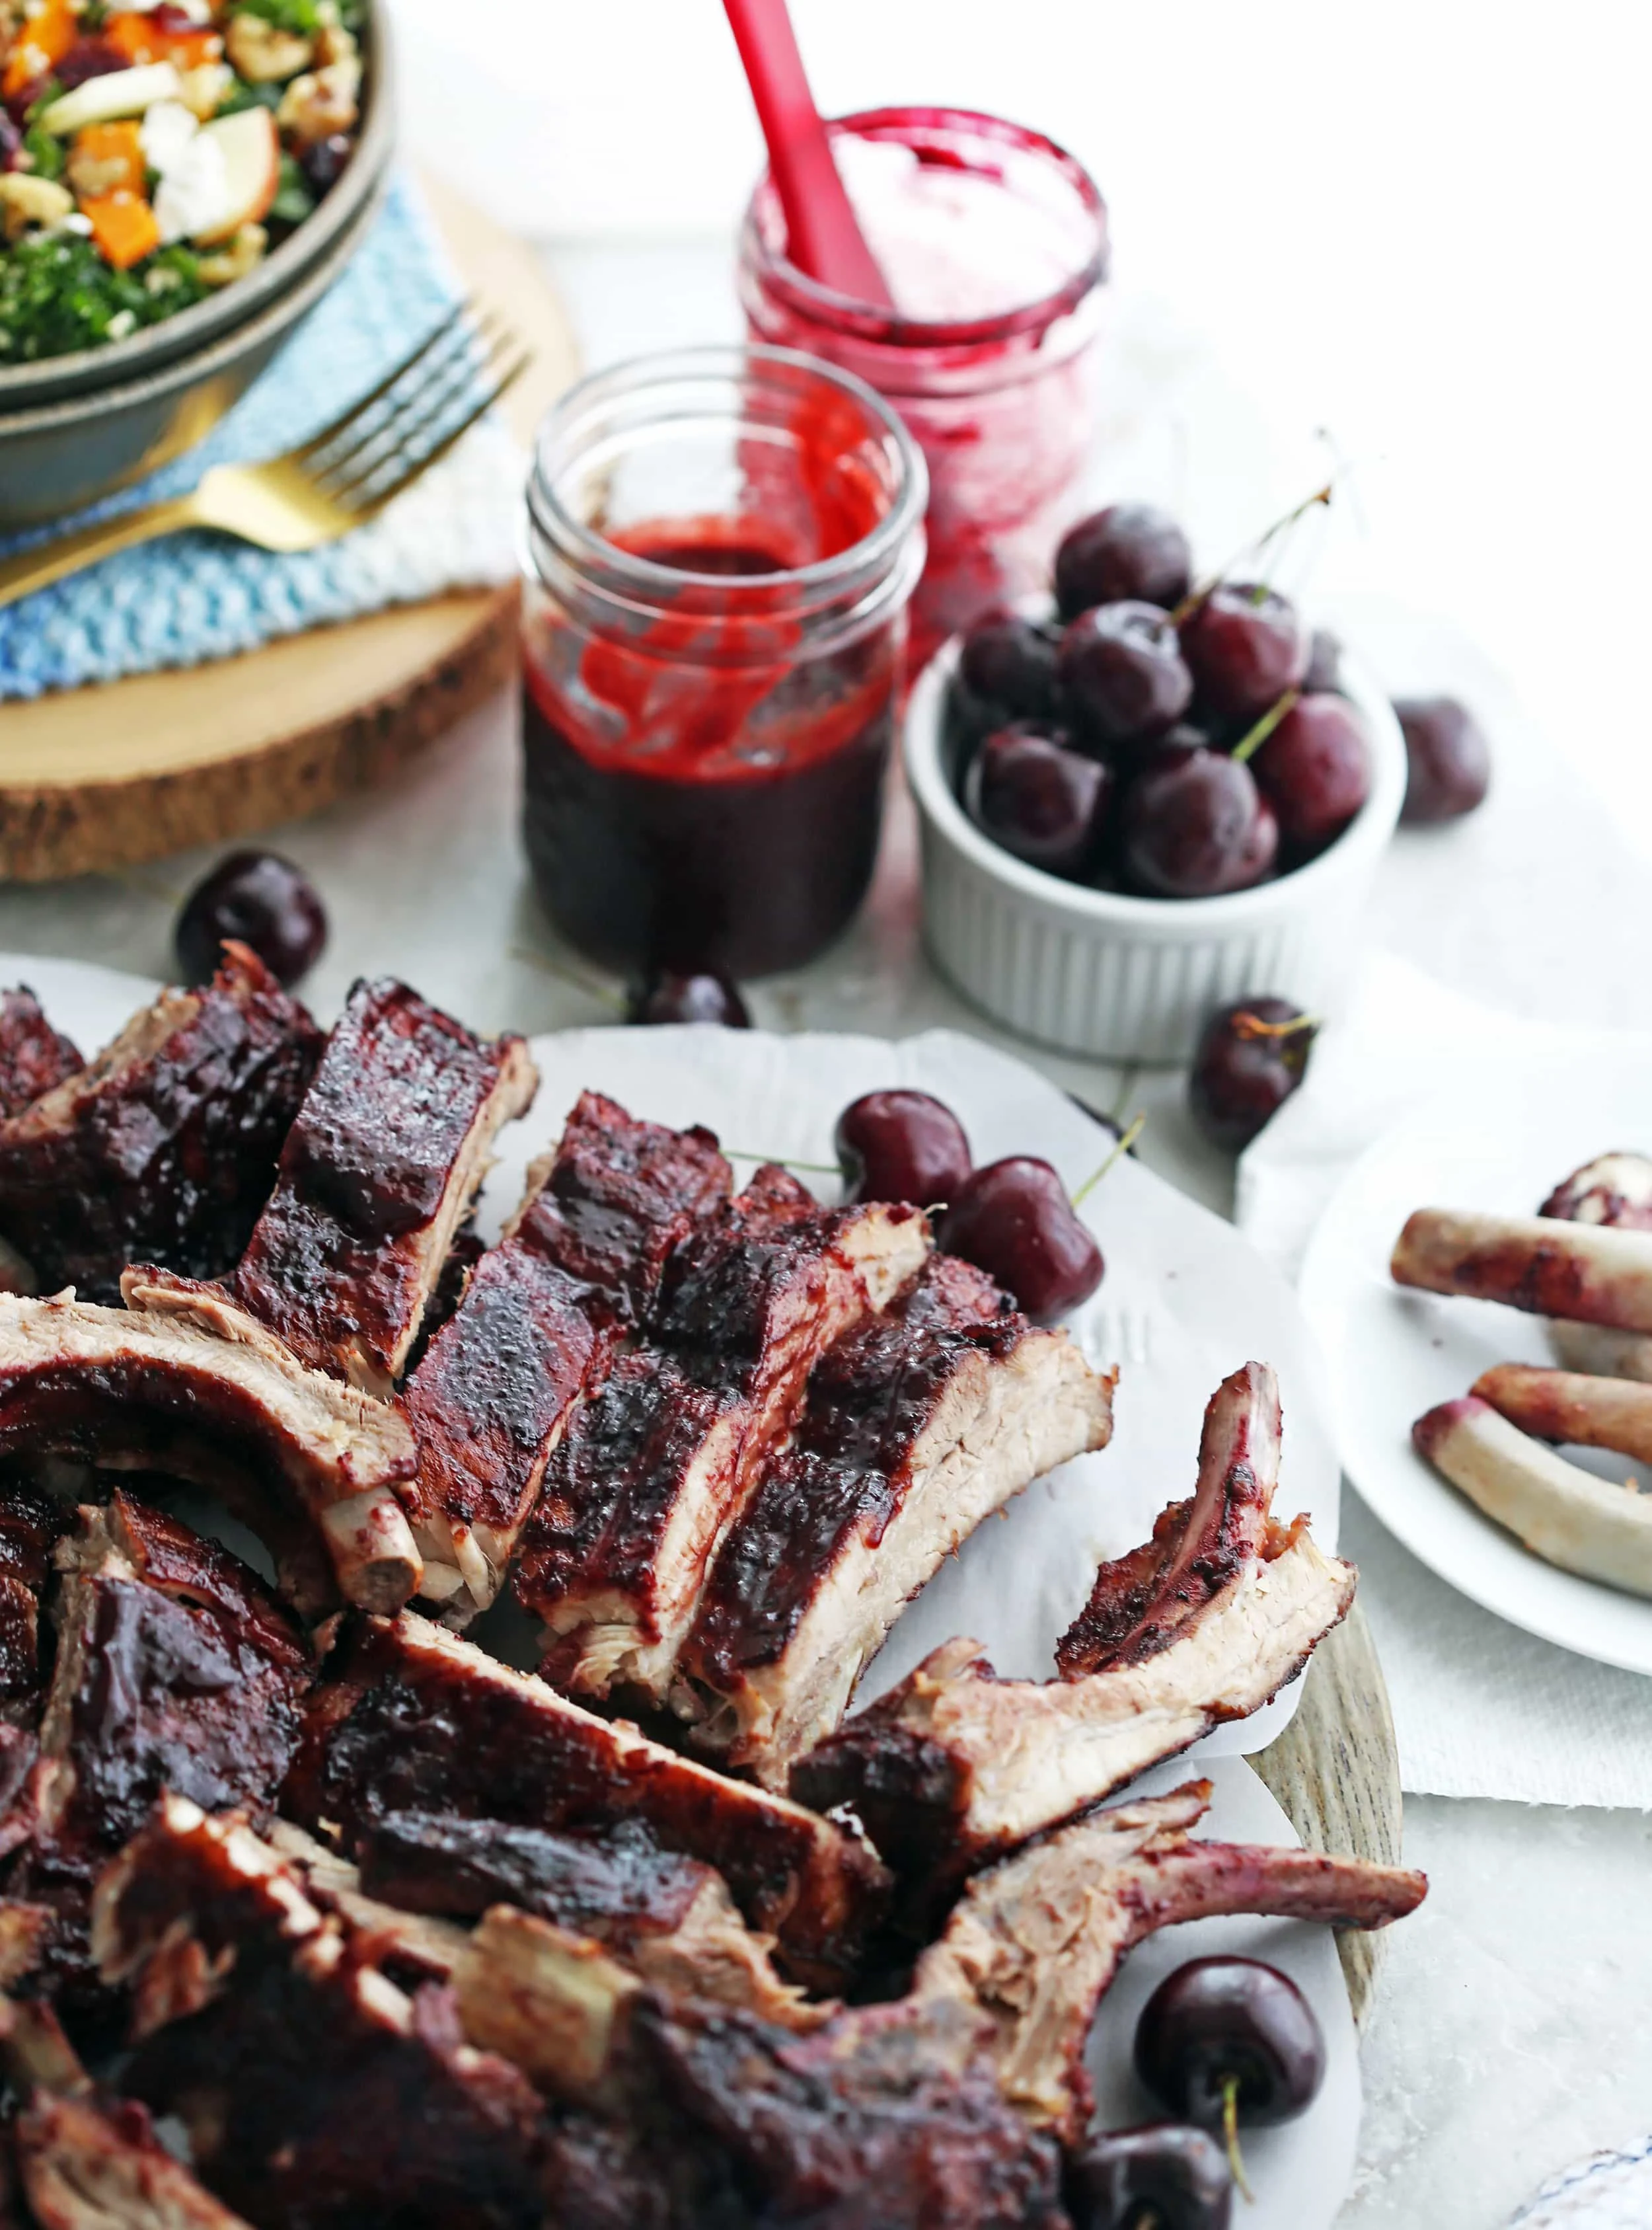 A platter of Baby Back Ribs covered with cherry chipotle sauce, a jar of sauce, and a bowl of fresh cherries on the side.